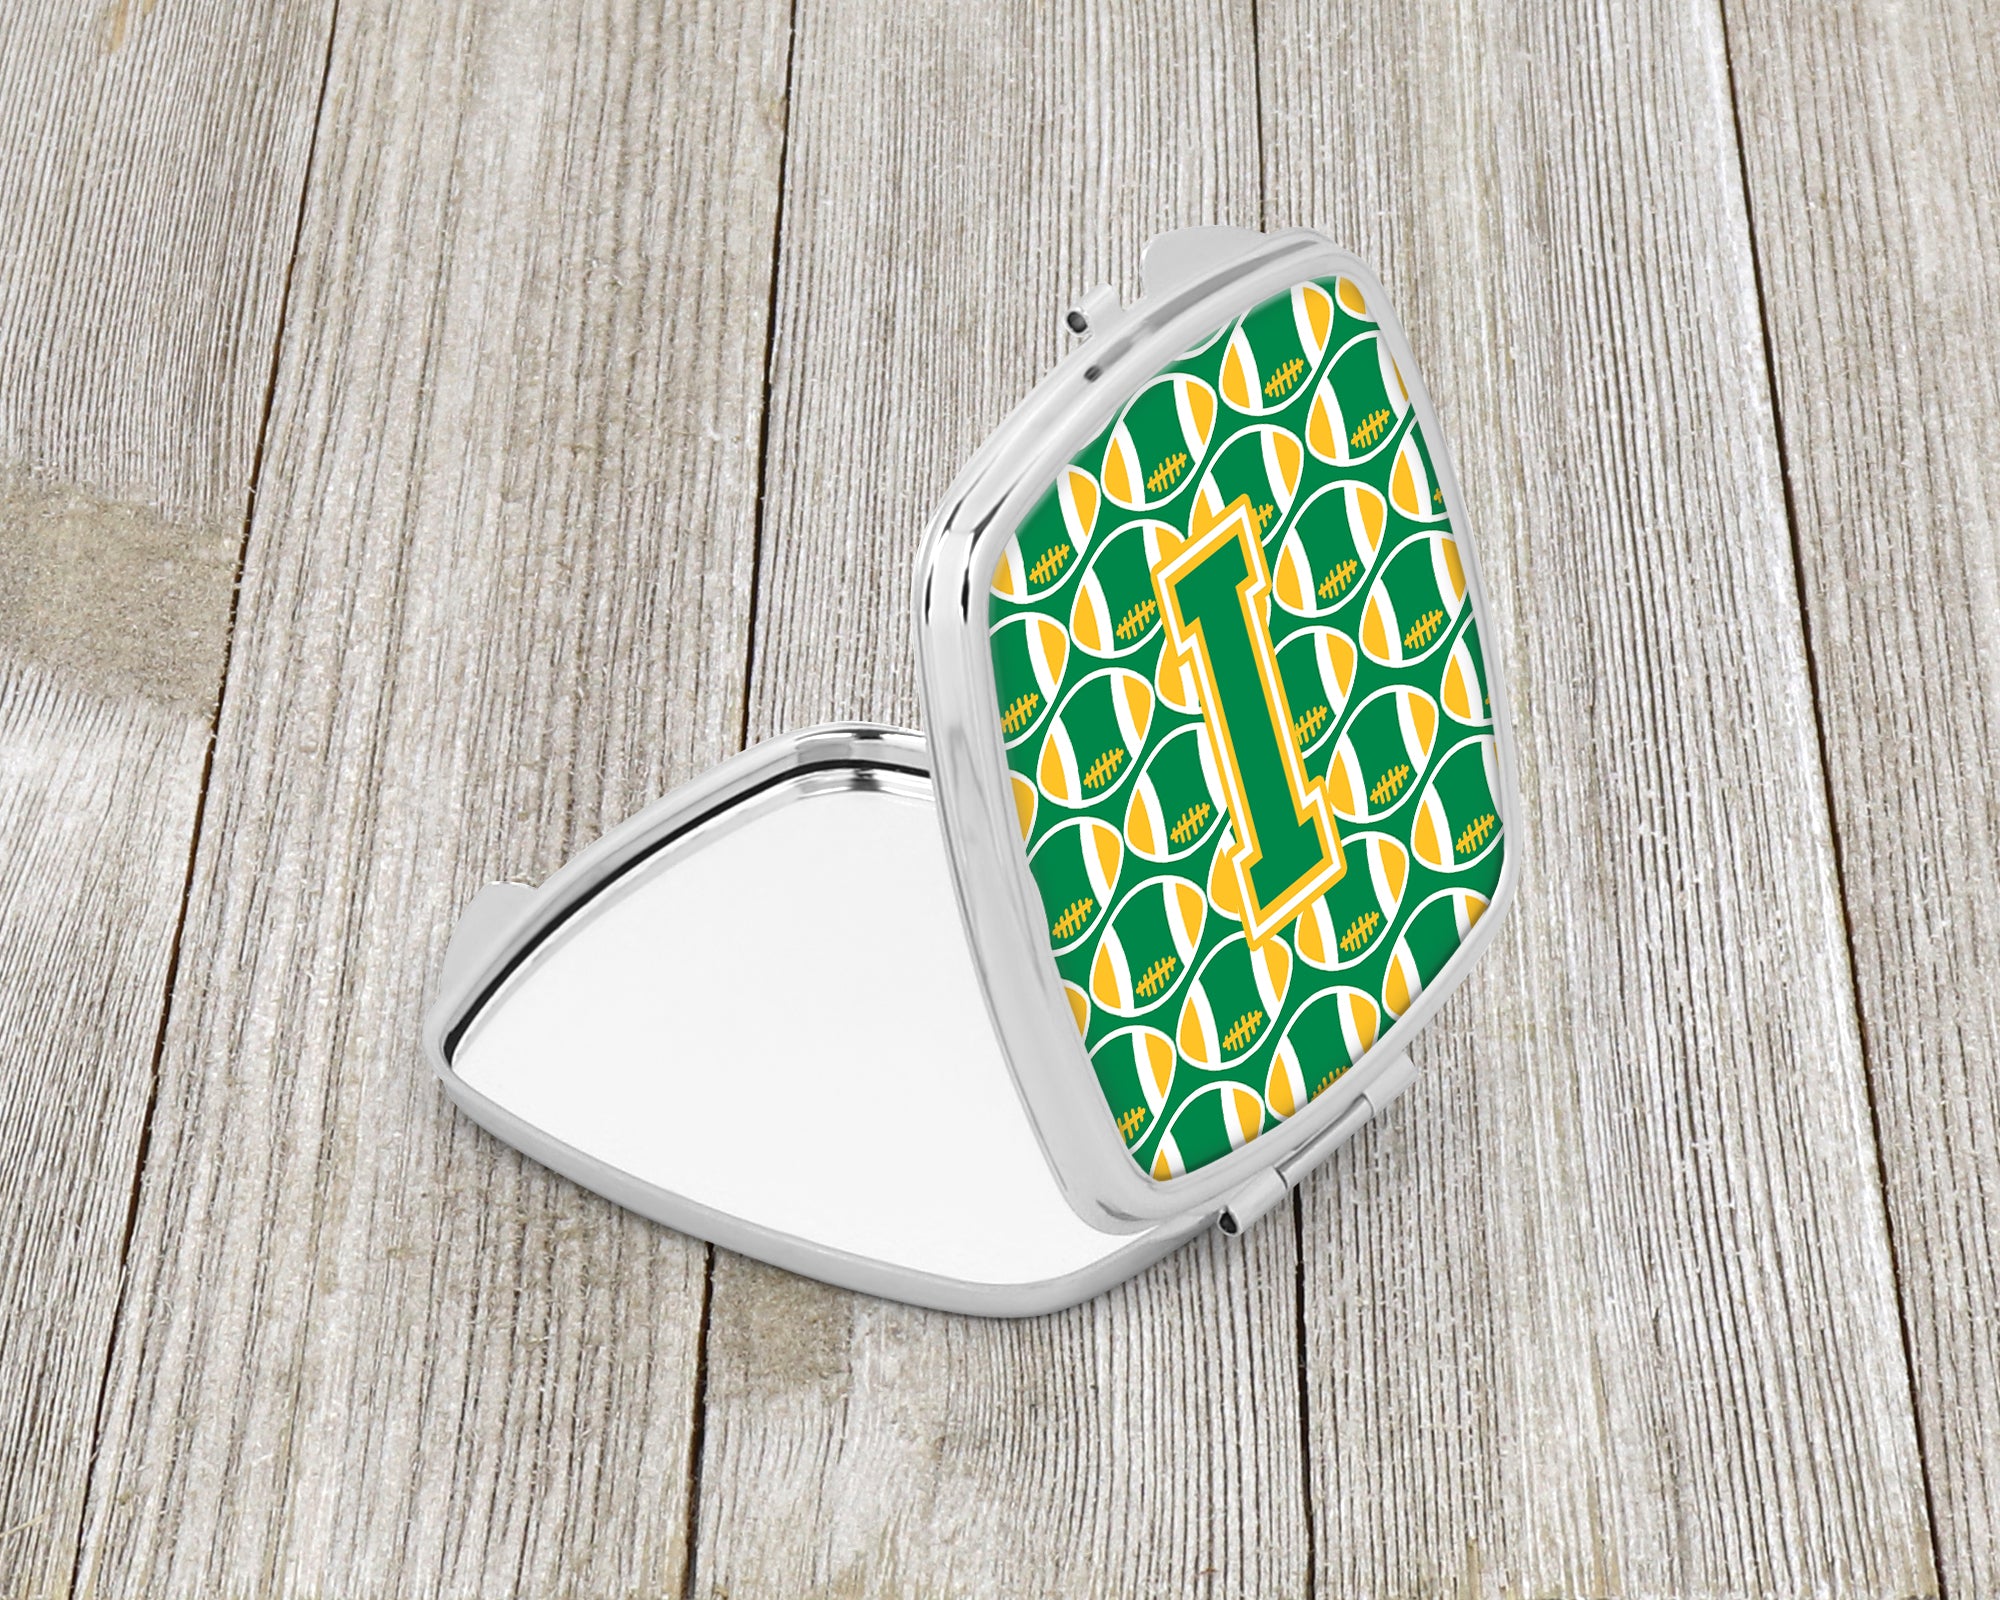 Letter I Football Green and Gold Compact Mirror CJ1069-ISCM  the-store.com.